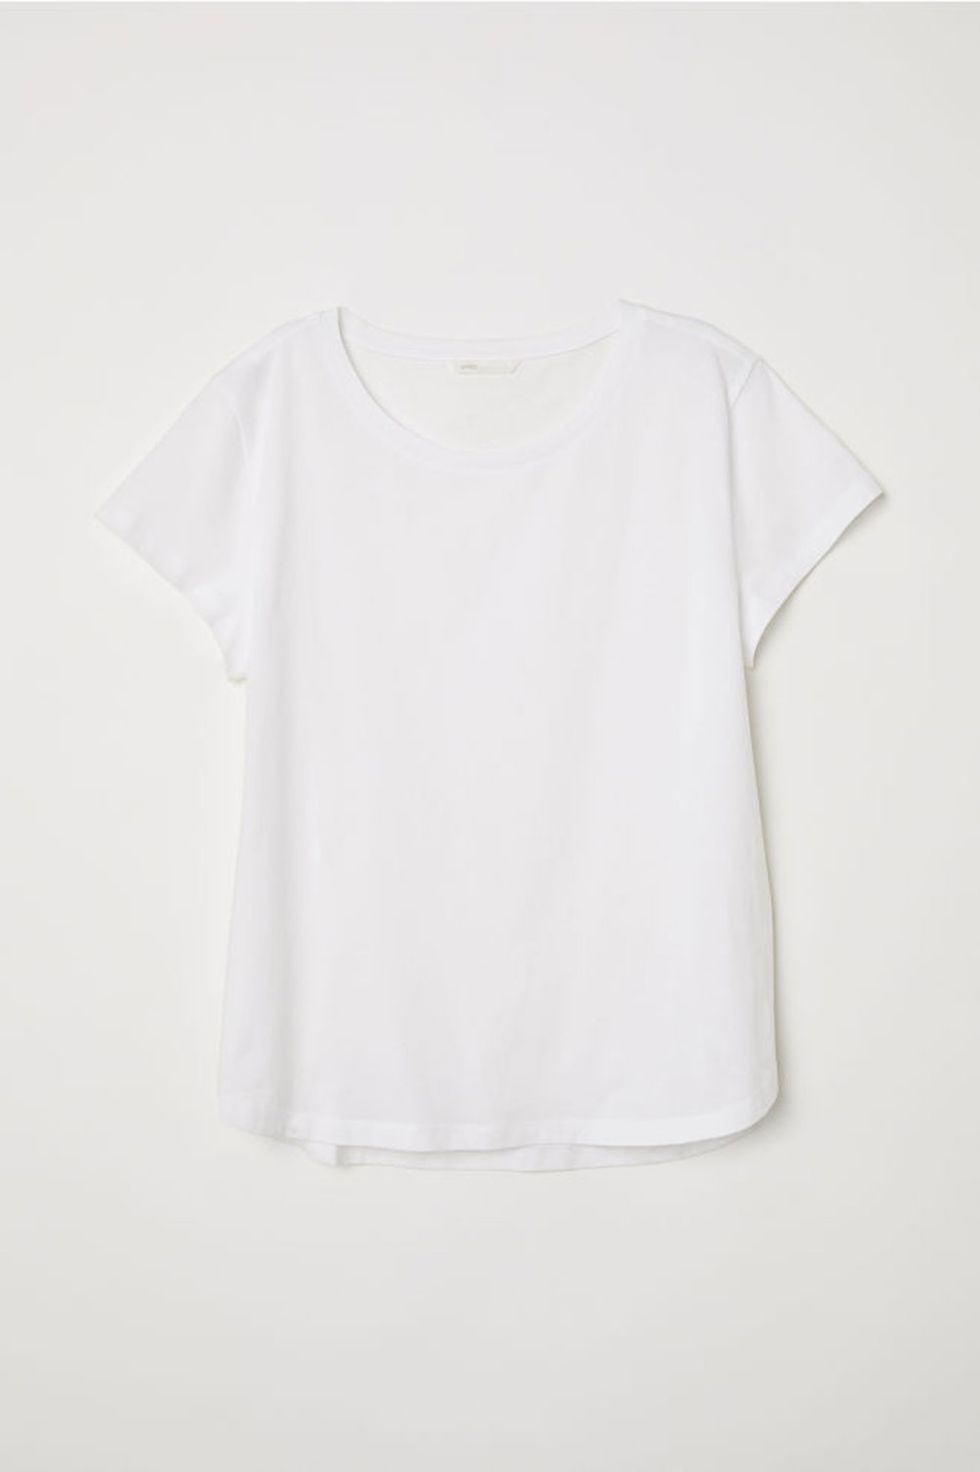 White, Clothing, T-shirt, Sleeve, Top, Blouse, Outerwear, Neck, 